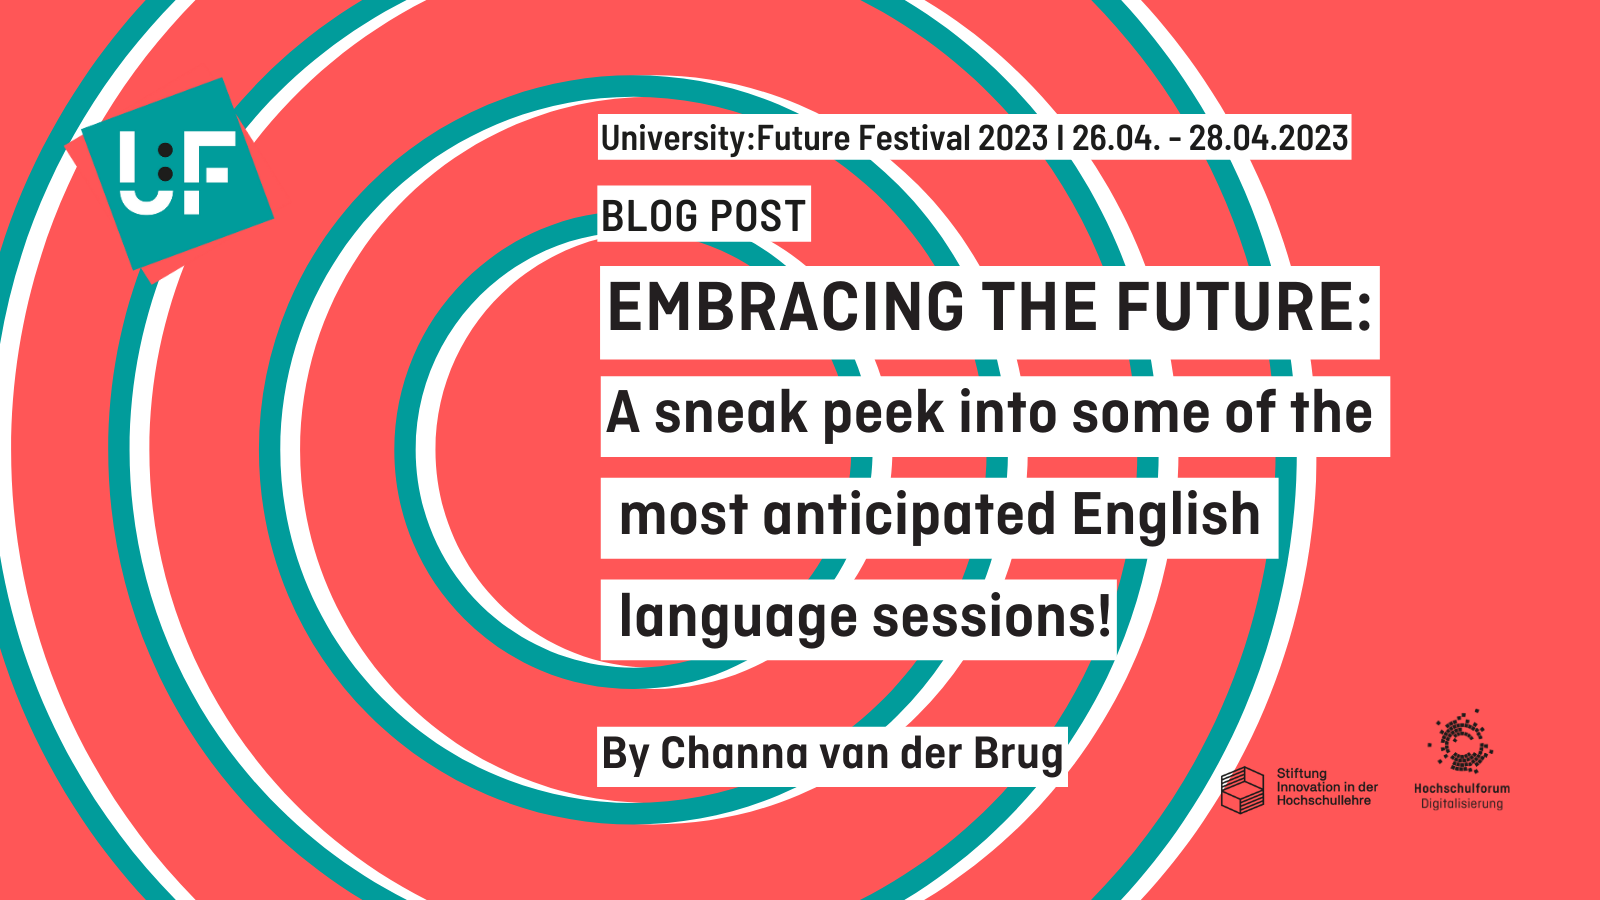 Sharepic for international sessions at U:FF 2023, Text: University:Future Festival 2023 I 26.04. - 28.04.2023,BLOG POST,EMBRACING THE FUTURE: A sneak-peak into some of the  most anticipated English language sessions!, By Channa van der Brug; the logos of the HFD and StiL are pictured in the lower right-hand corner, the U:FF logo is displayed in the upper left corner